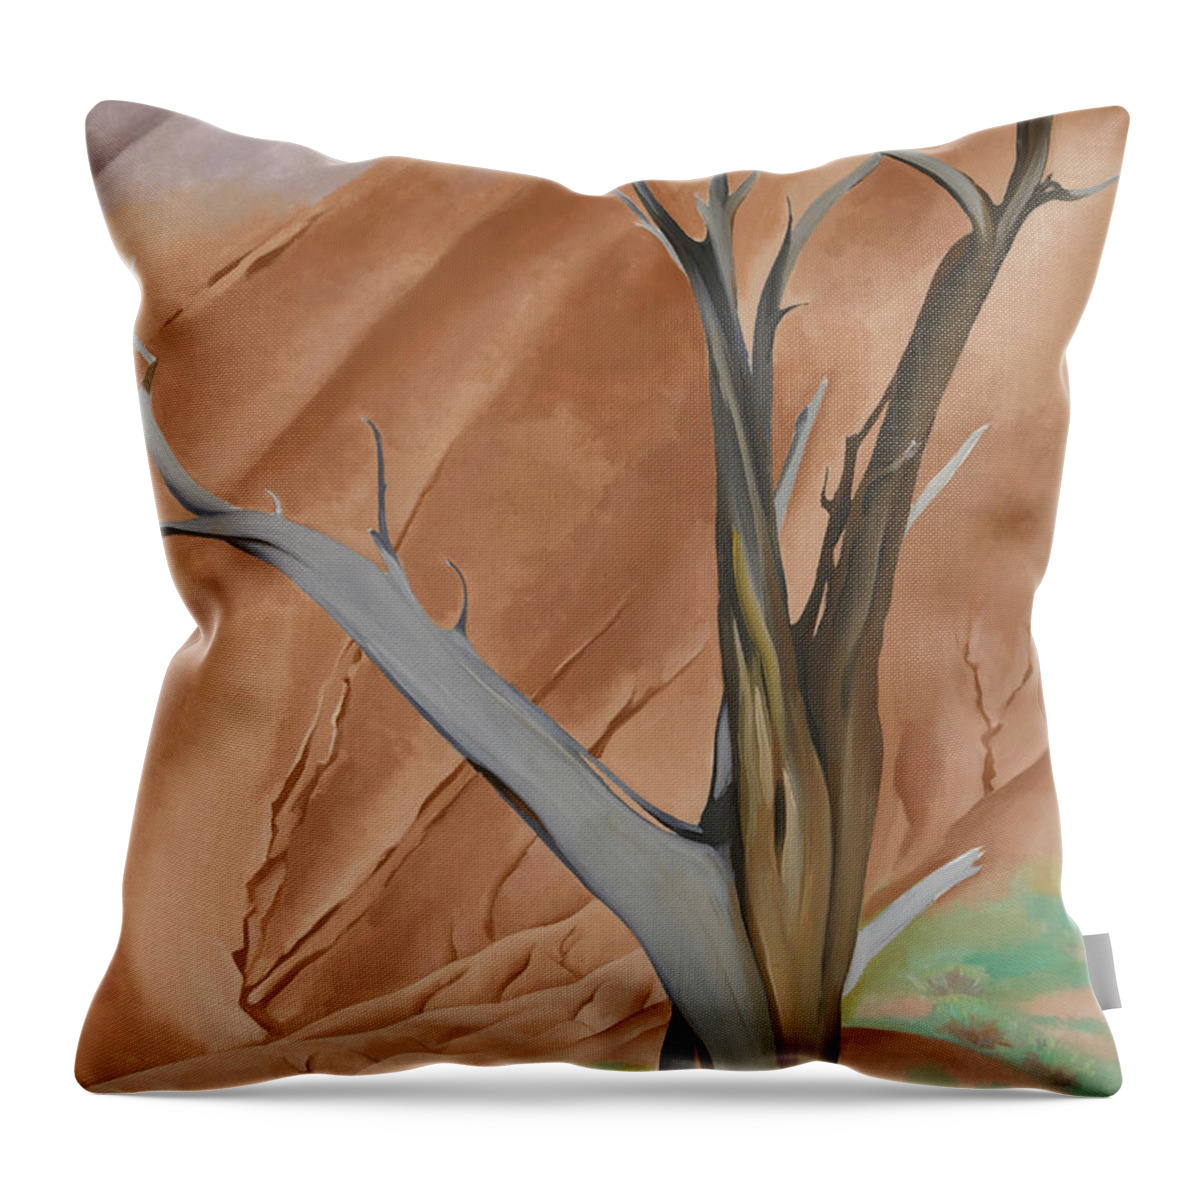 Georgia O'keeffe Throw Pillow featuring the painting Gerald's Tree I. by Georgia O'Keeffe